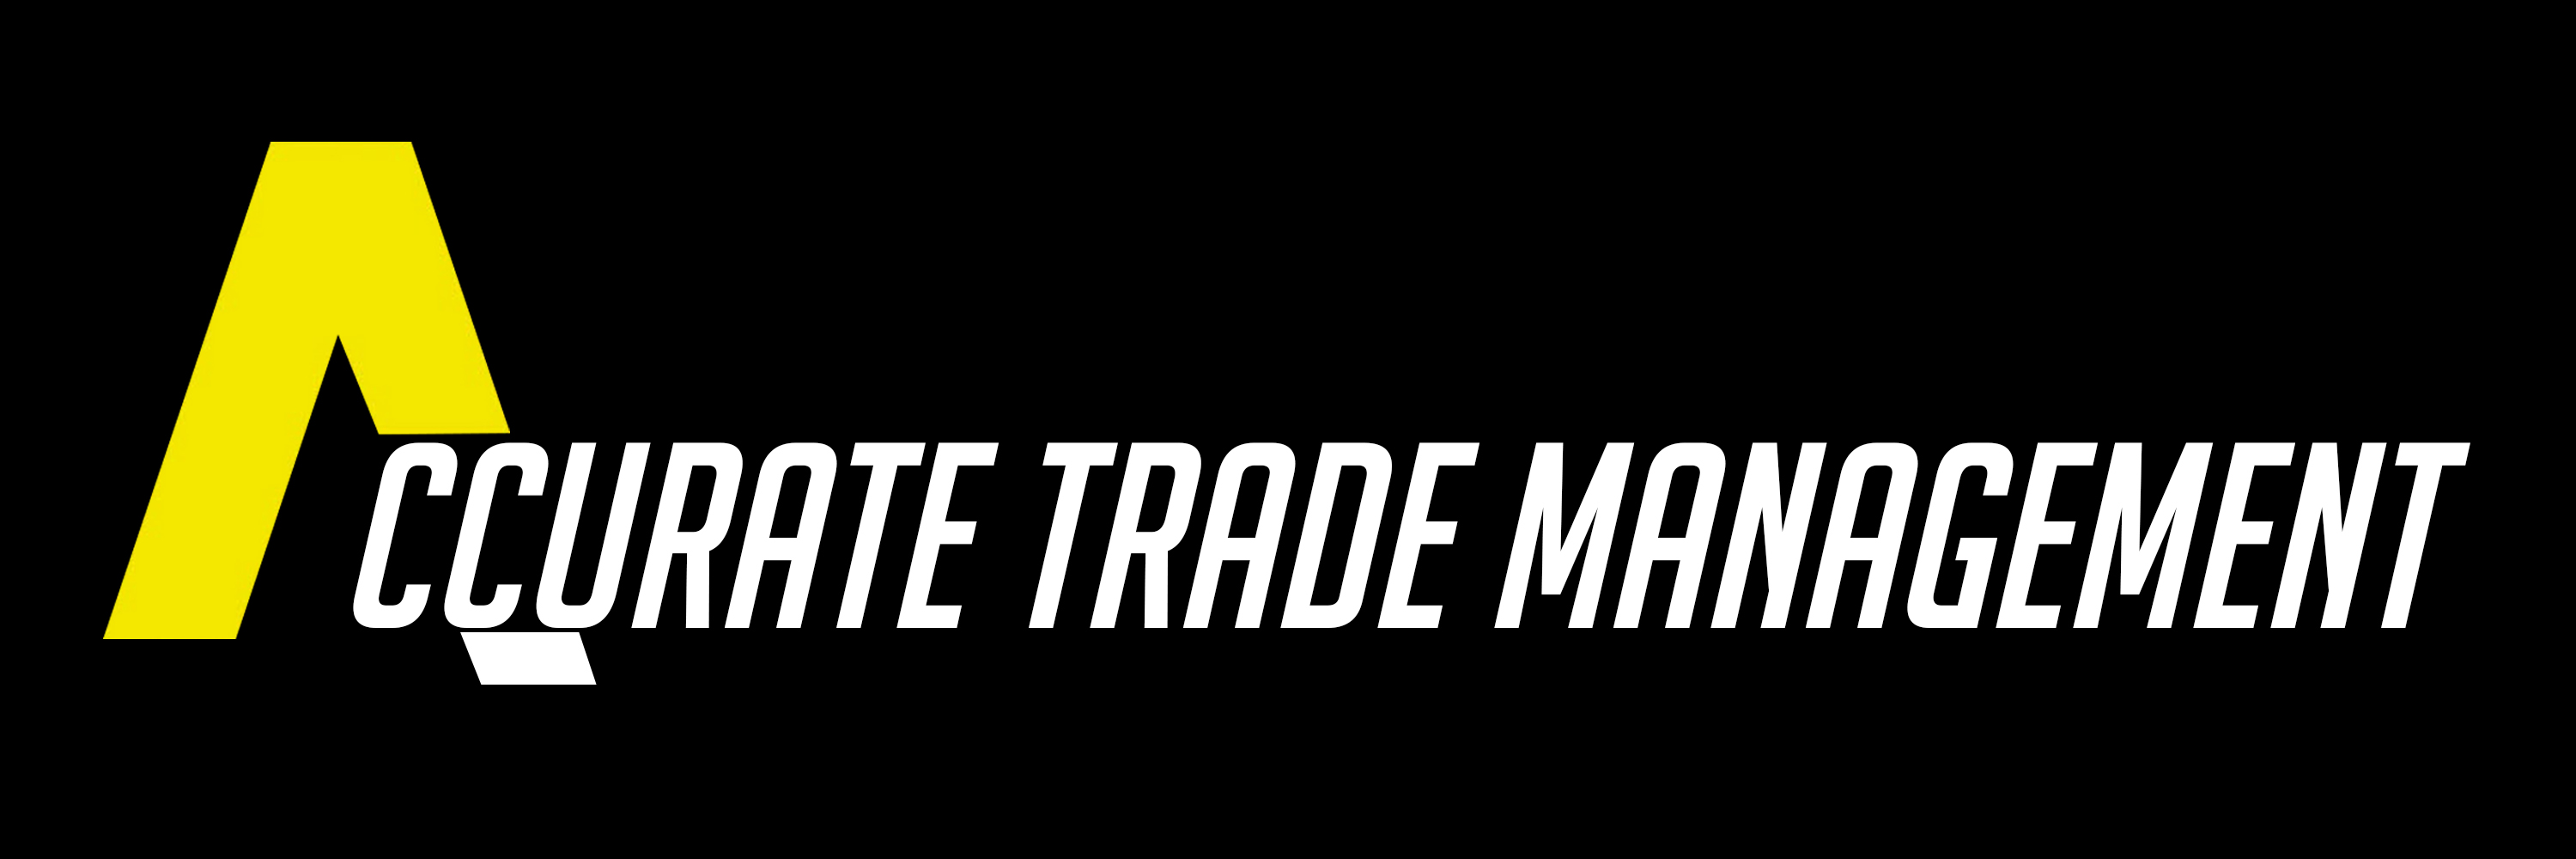 Accurate Trade Management